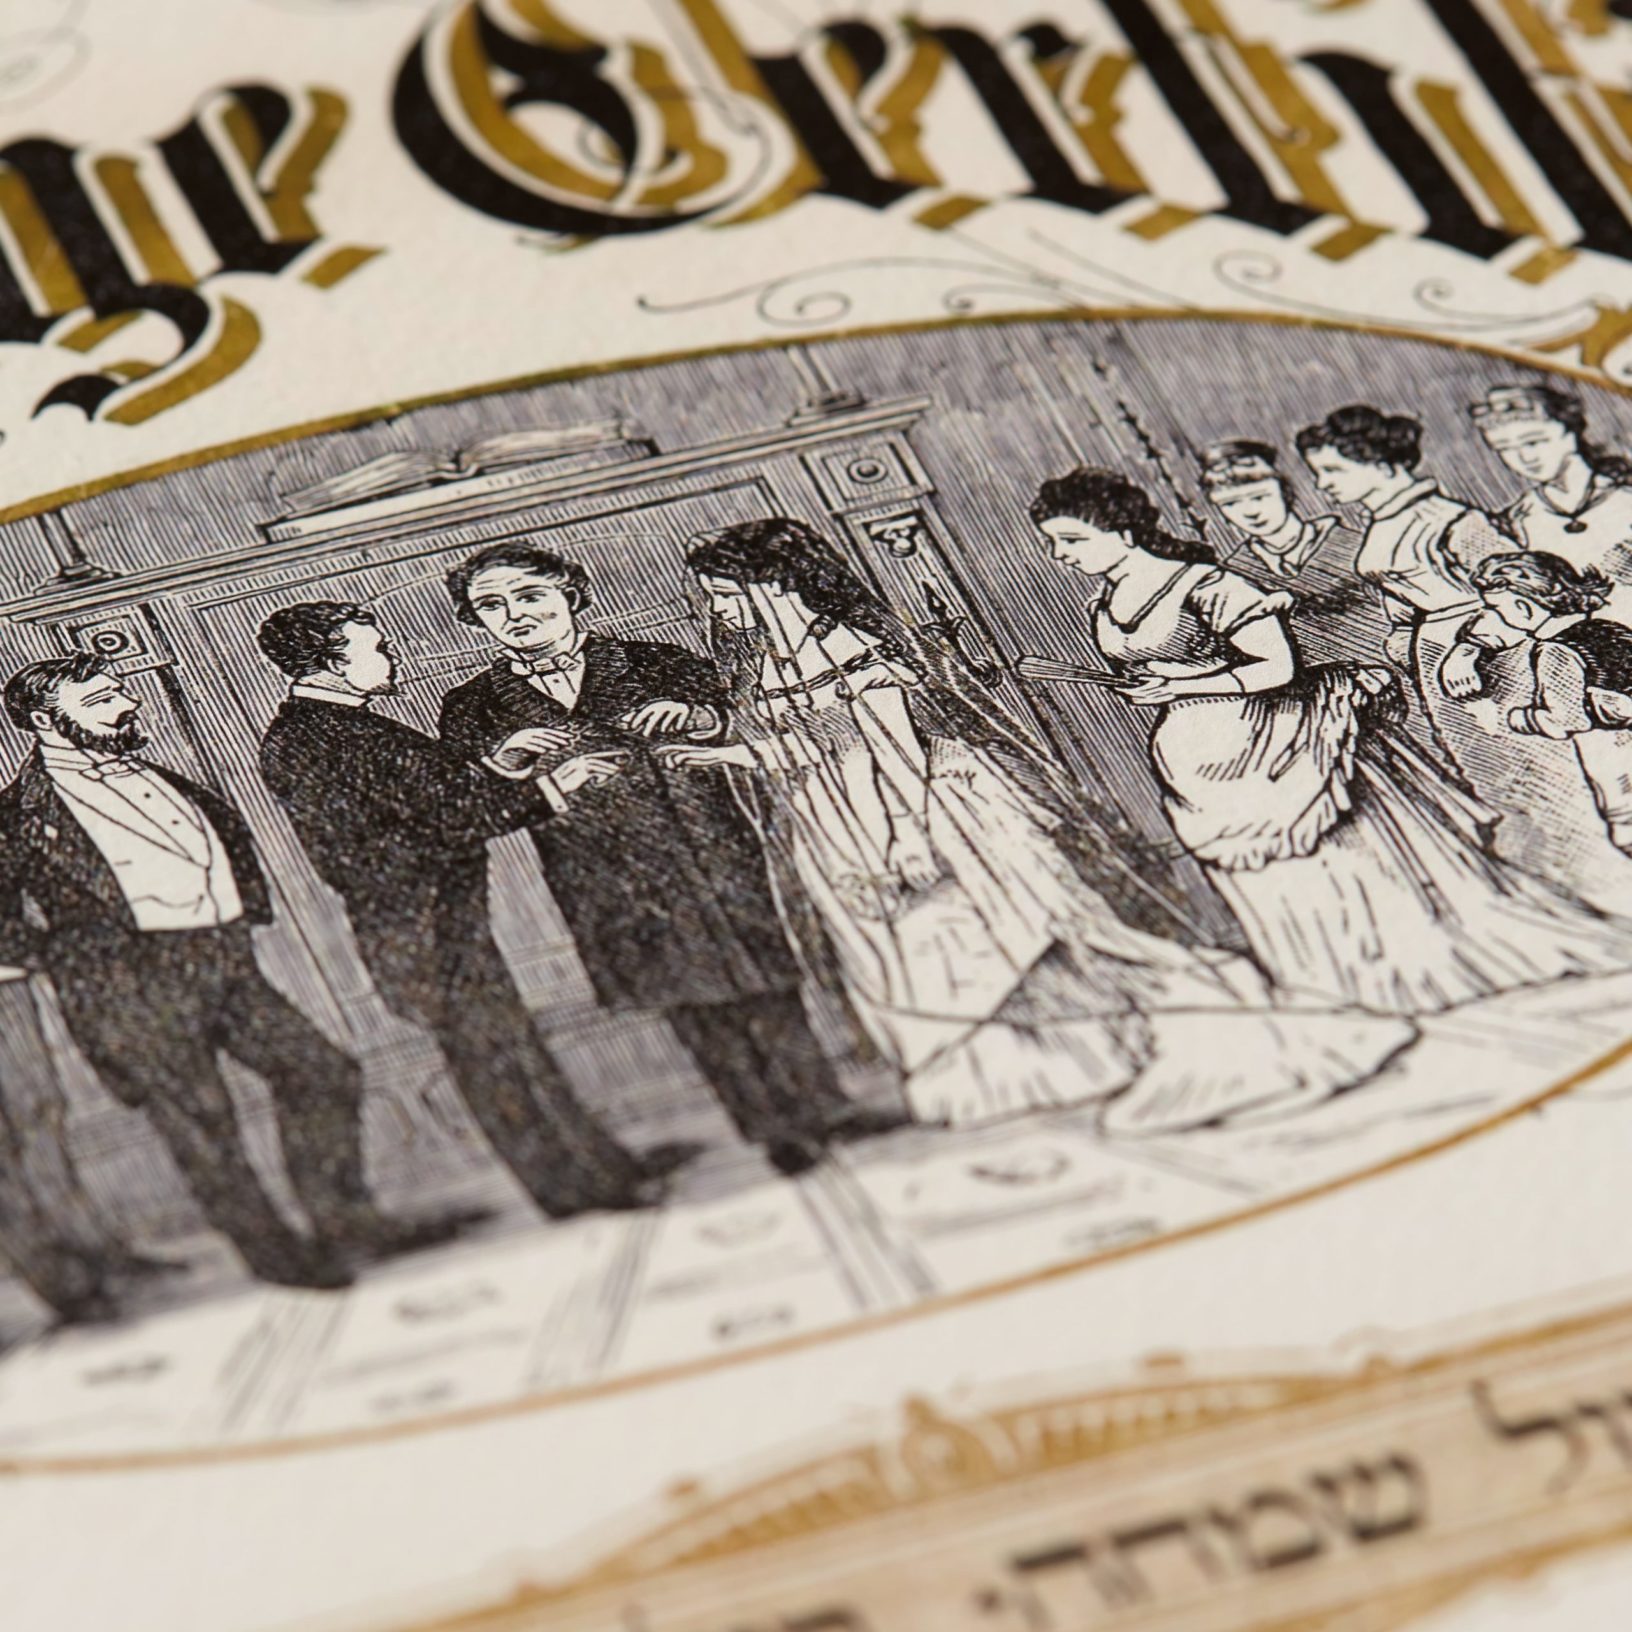 Richmond, Virginia, 1891 Ketubah Marriage Contracts by The Jewish Museum